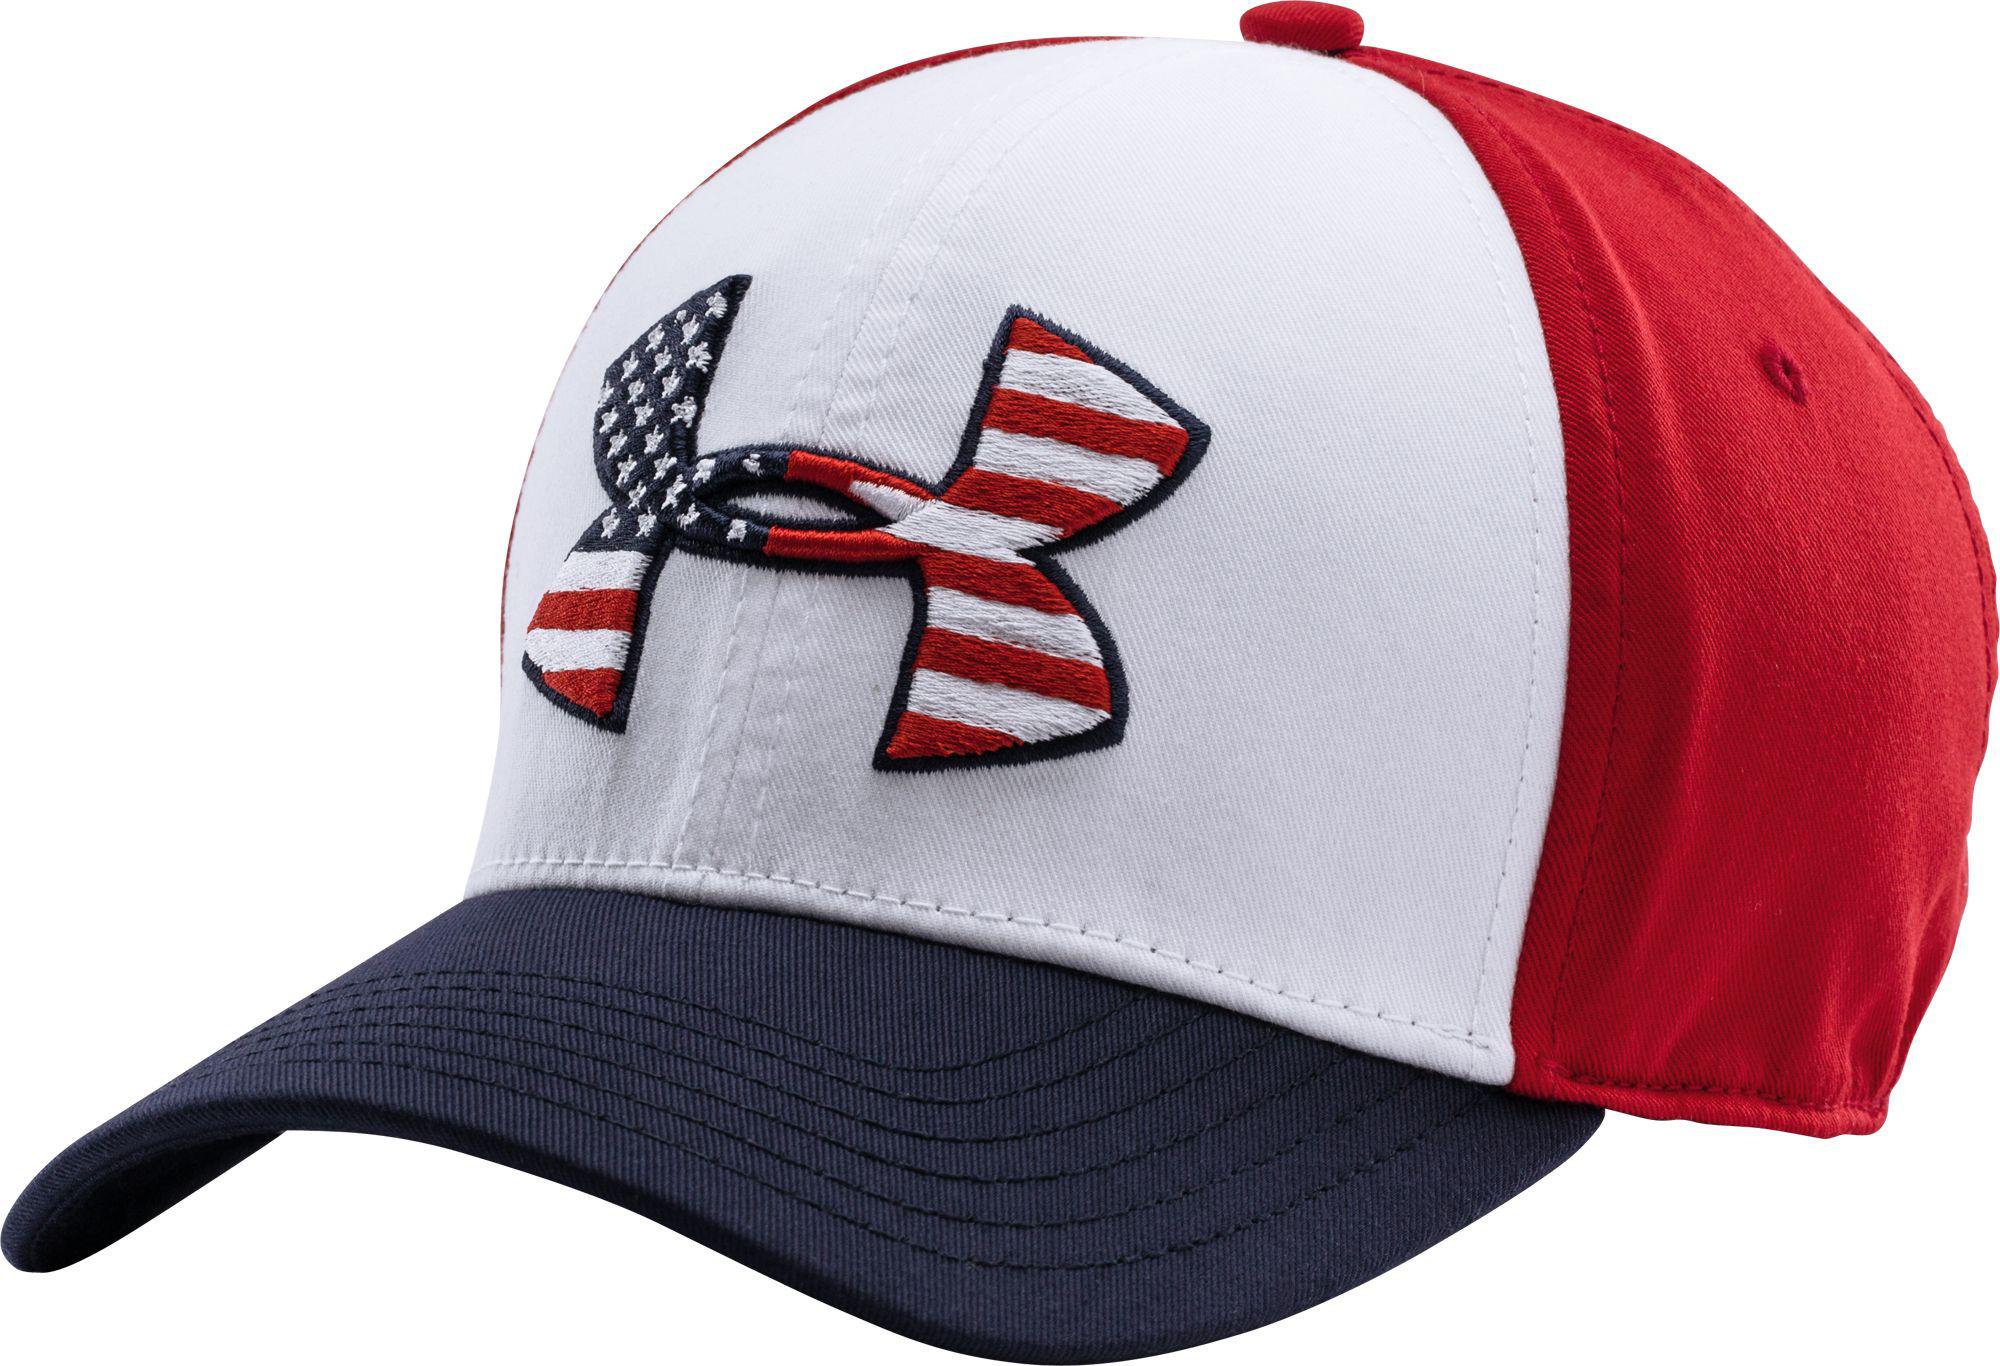 Under Armour World Flag Low Crown Hat 